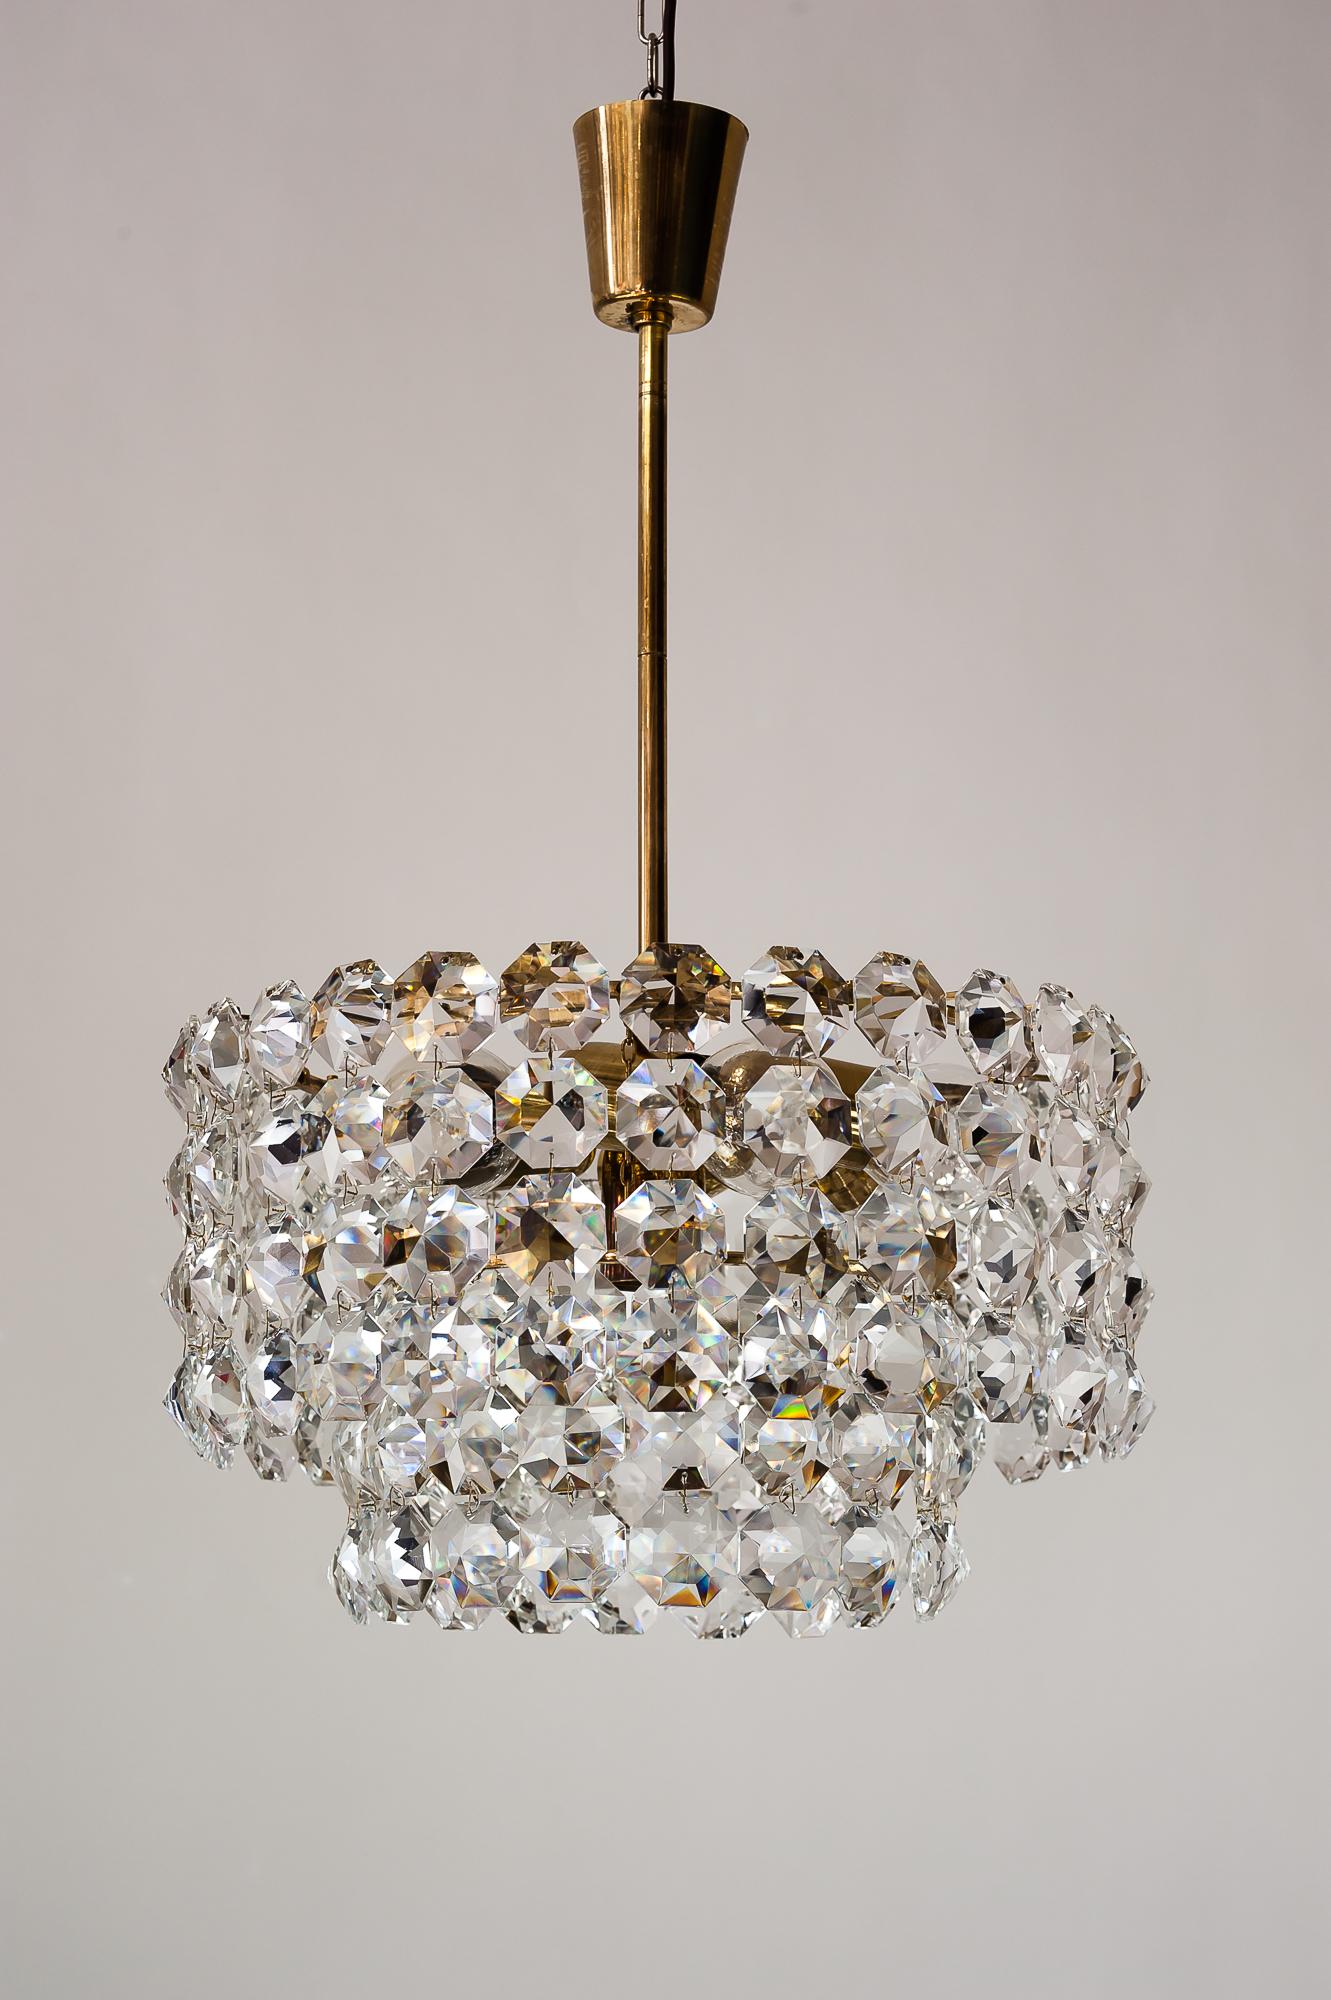 Beautiful crystal chandelier by Bakalowits & Sons, Vienna, 1960s.
Excellent original condition.
Picture 12 the chandelier has 7 Bulbs (one in the middle hanging down).